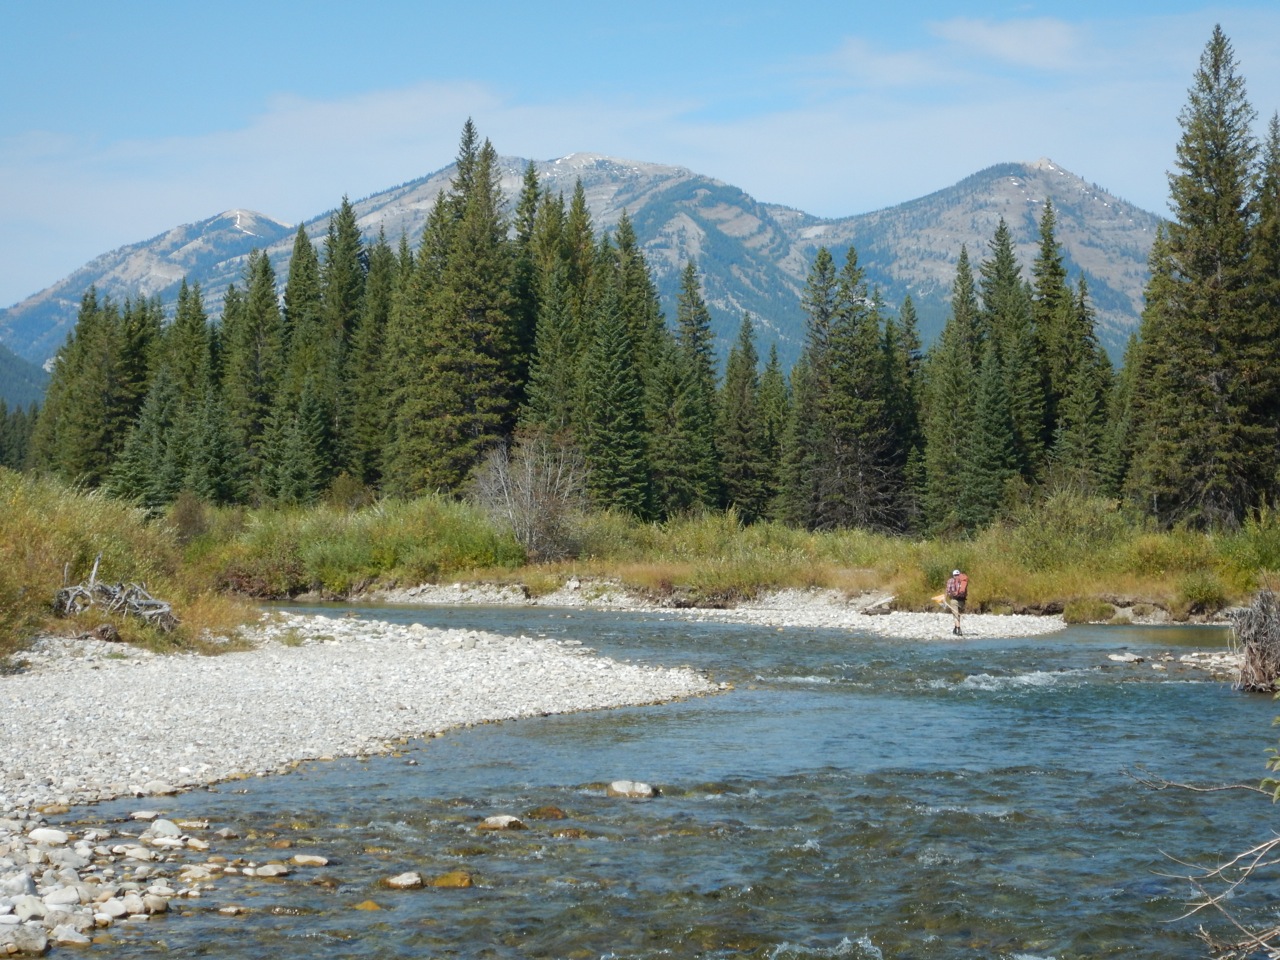 The picturesque Flathead Valley, British Columbia - Project location for the Flathead Wild campaign. ©Living Lakes Canada